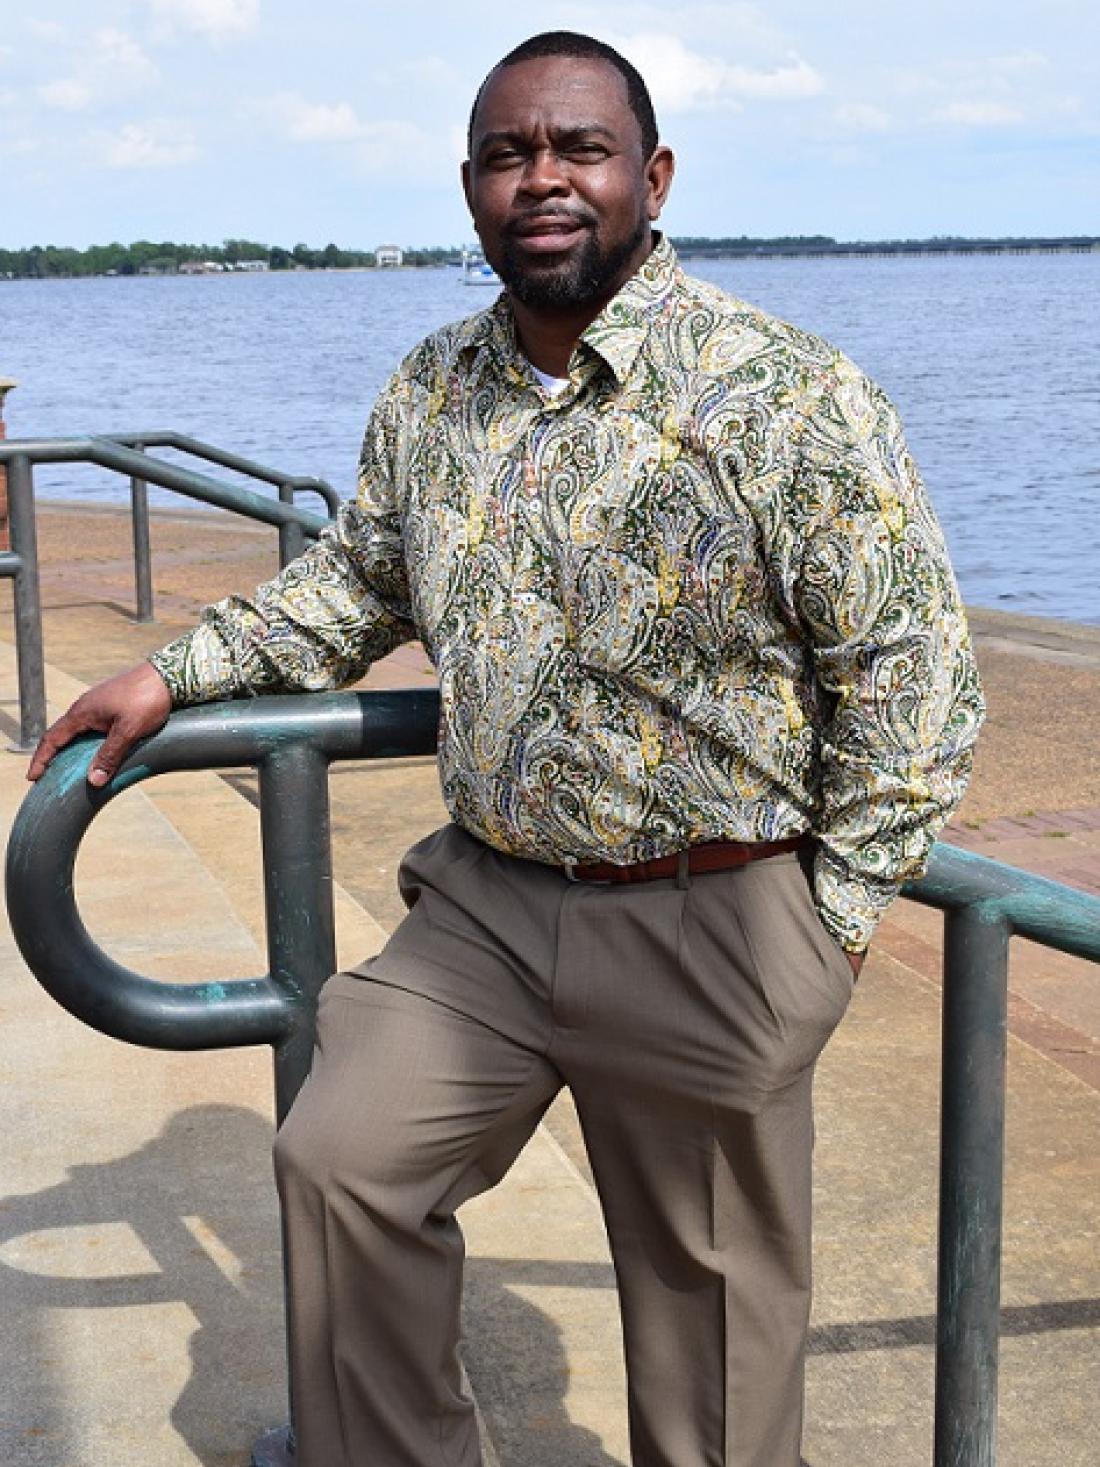 Craven CC Foundation board member Linster Strayhorn poses by the river